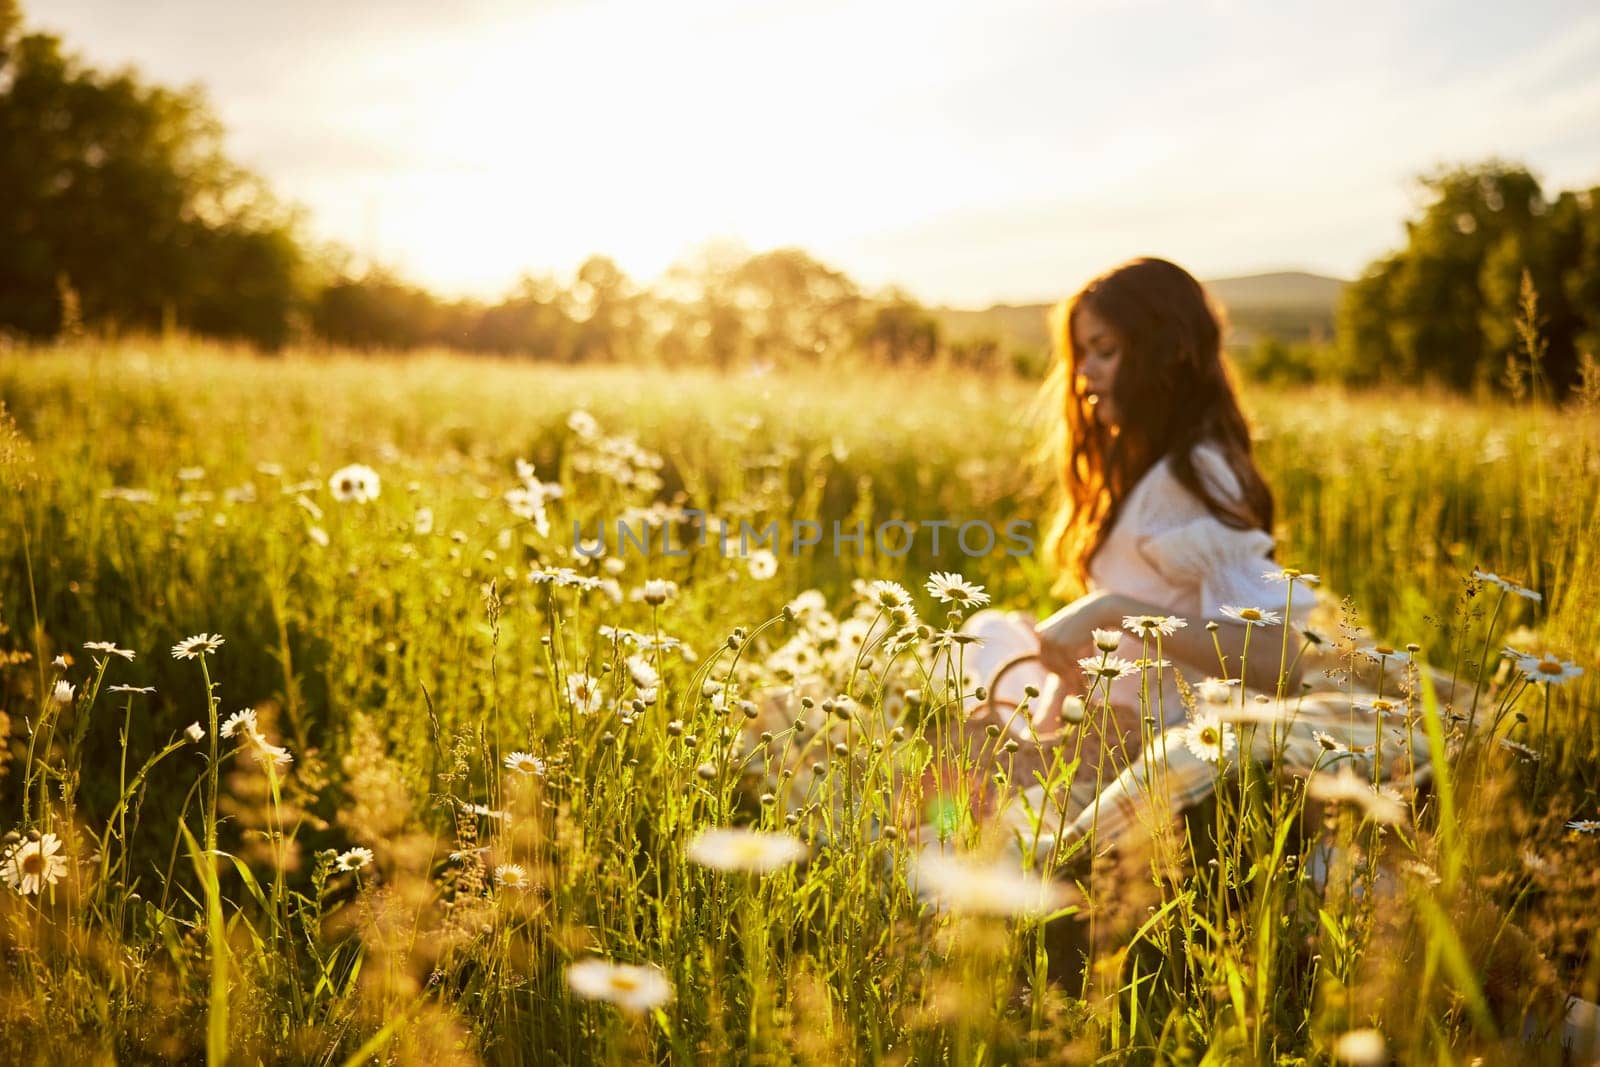 woman sitting in a field with daisies in a light dress out of focus by Vichizh